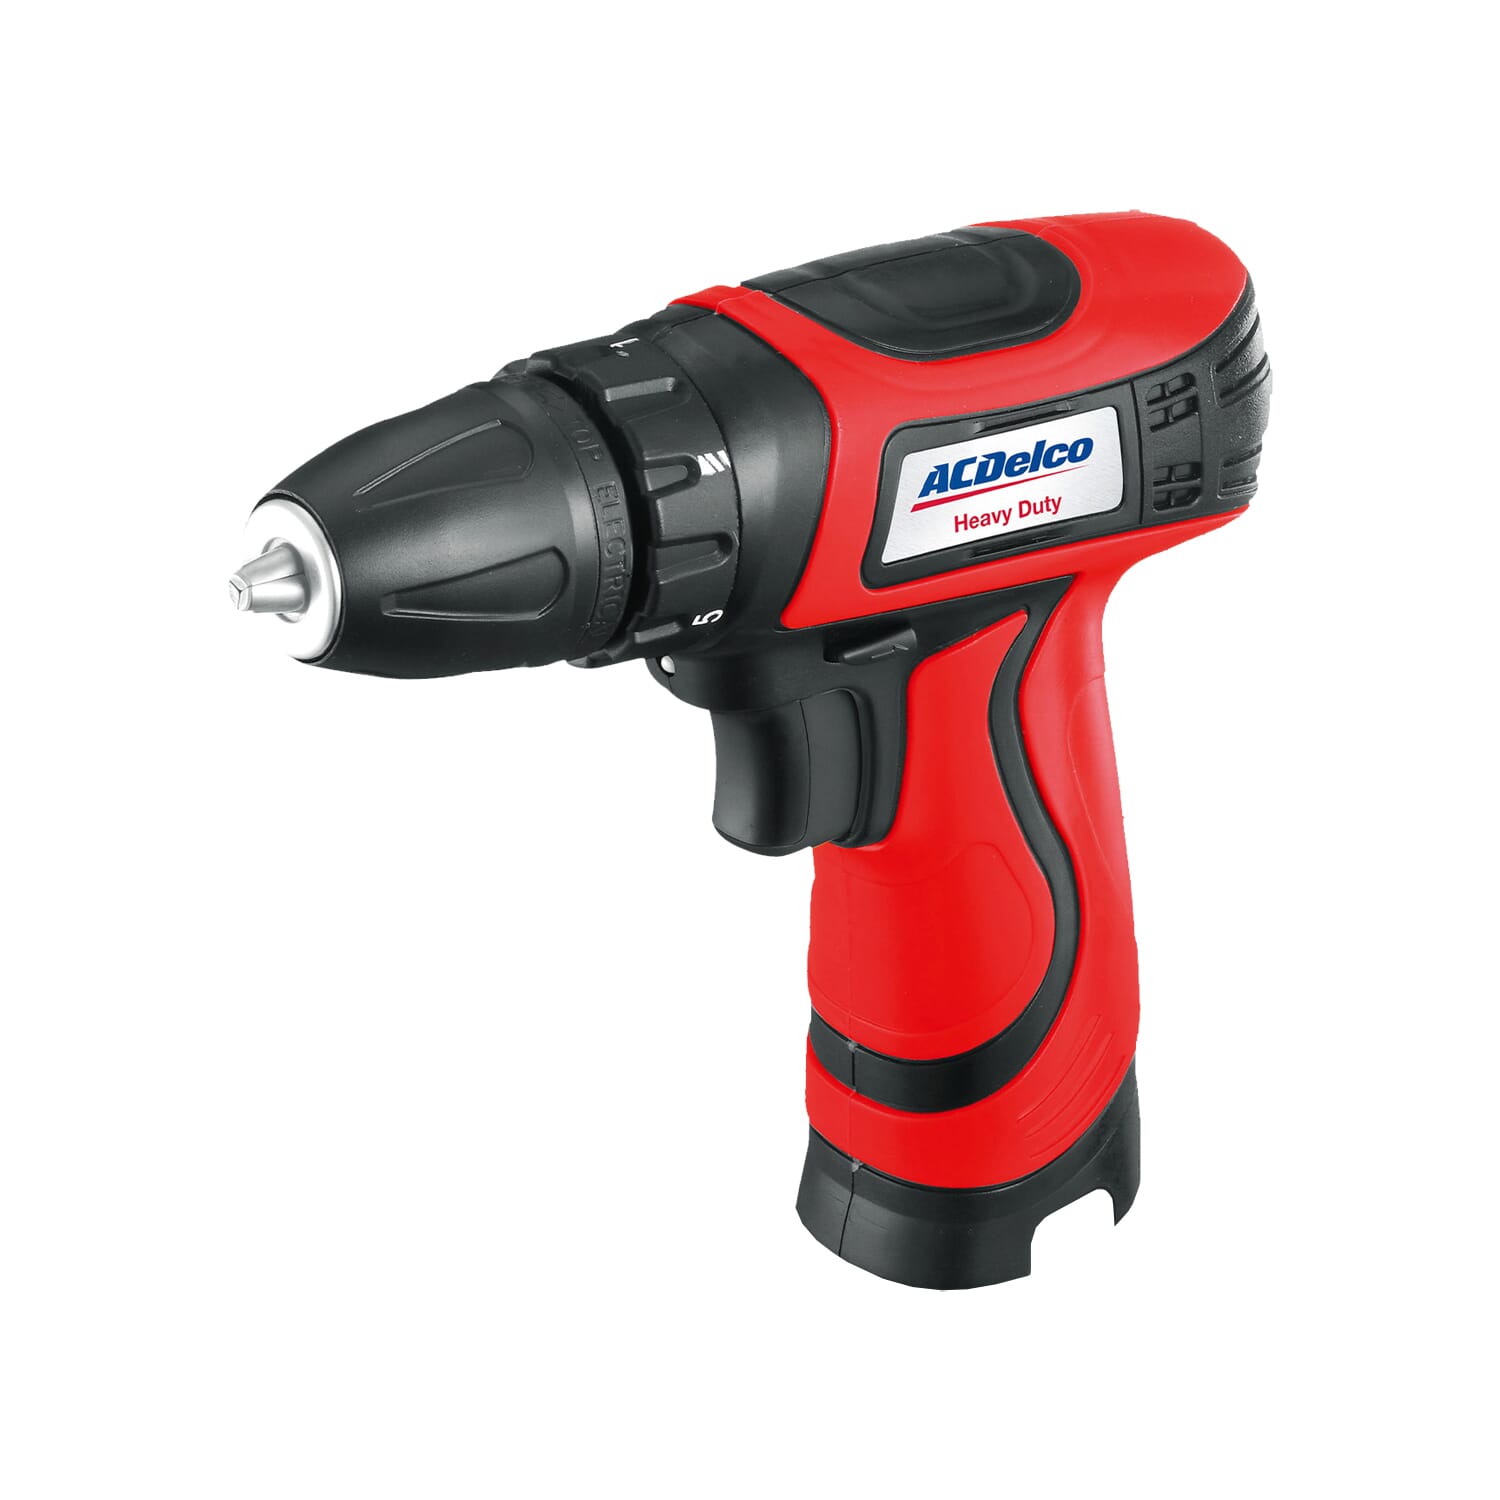 ARD849T 8V 6mm Drill / Driver Power Tool - Tool Only